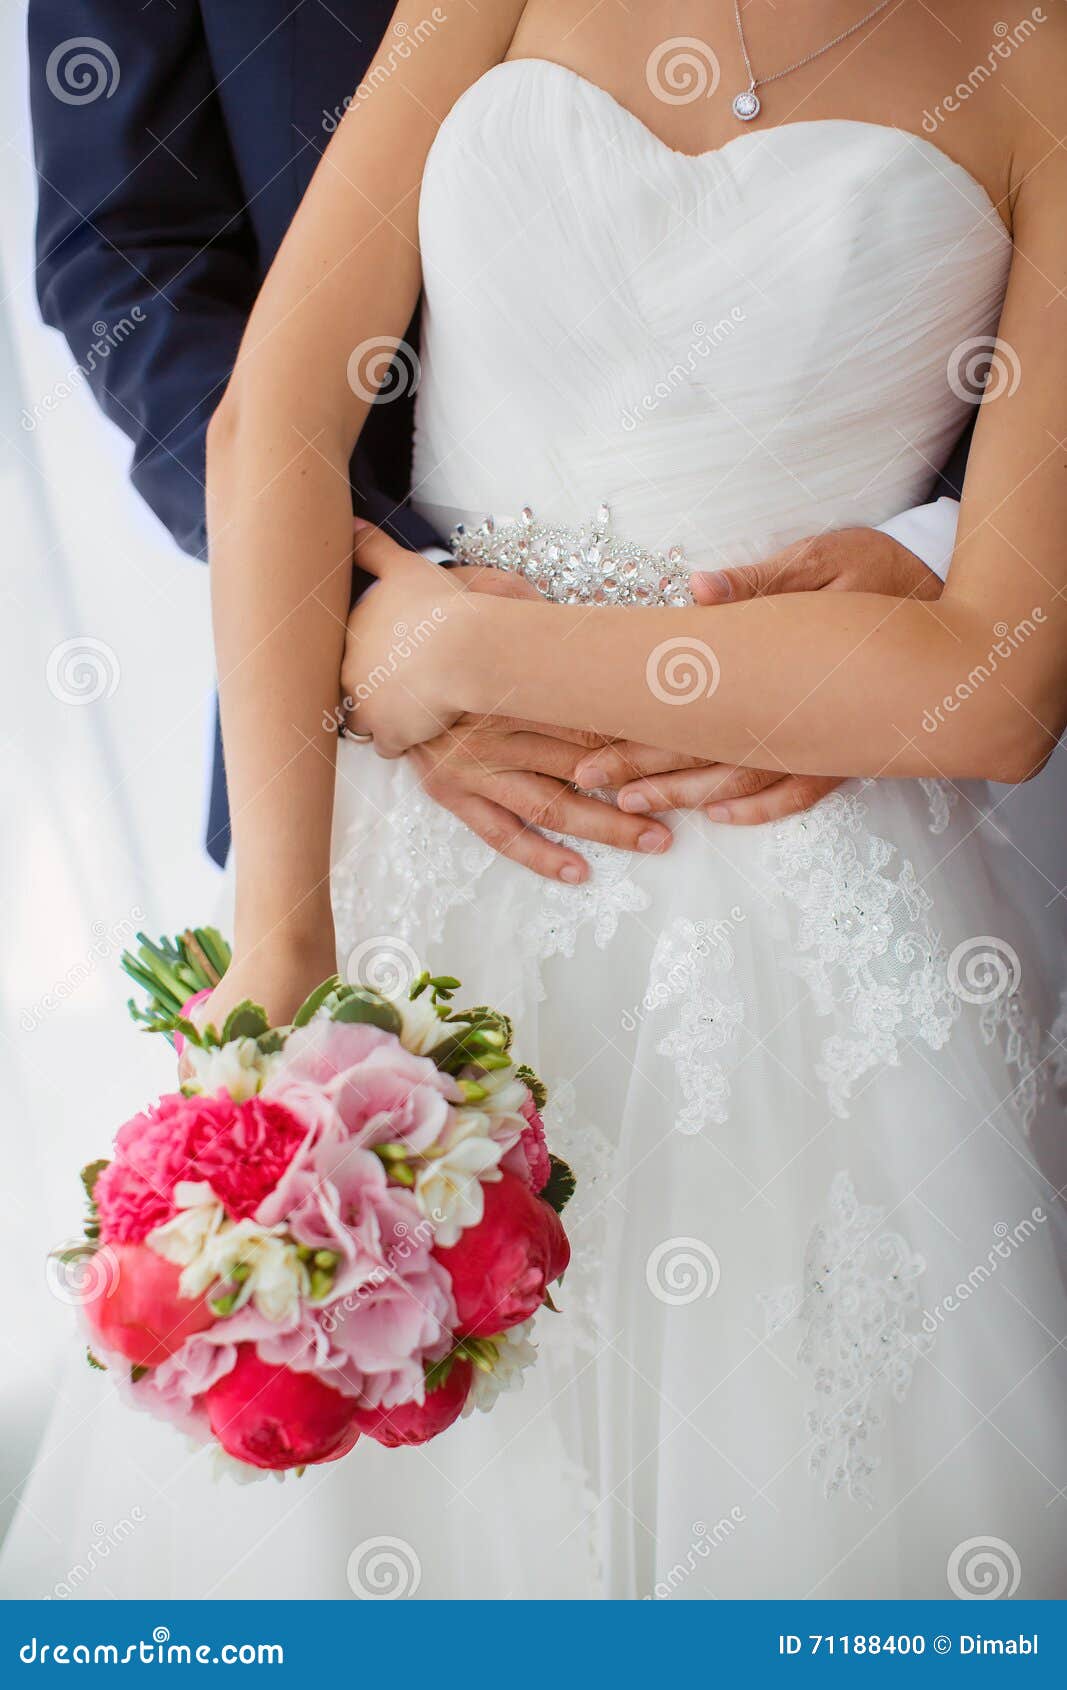 Wedding Details. Bride and Groom Indoors Stock Photo - Image of ...